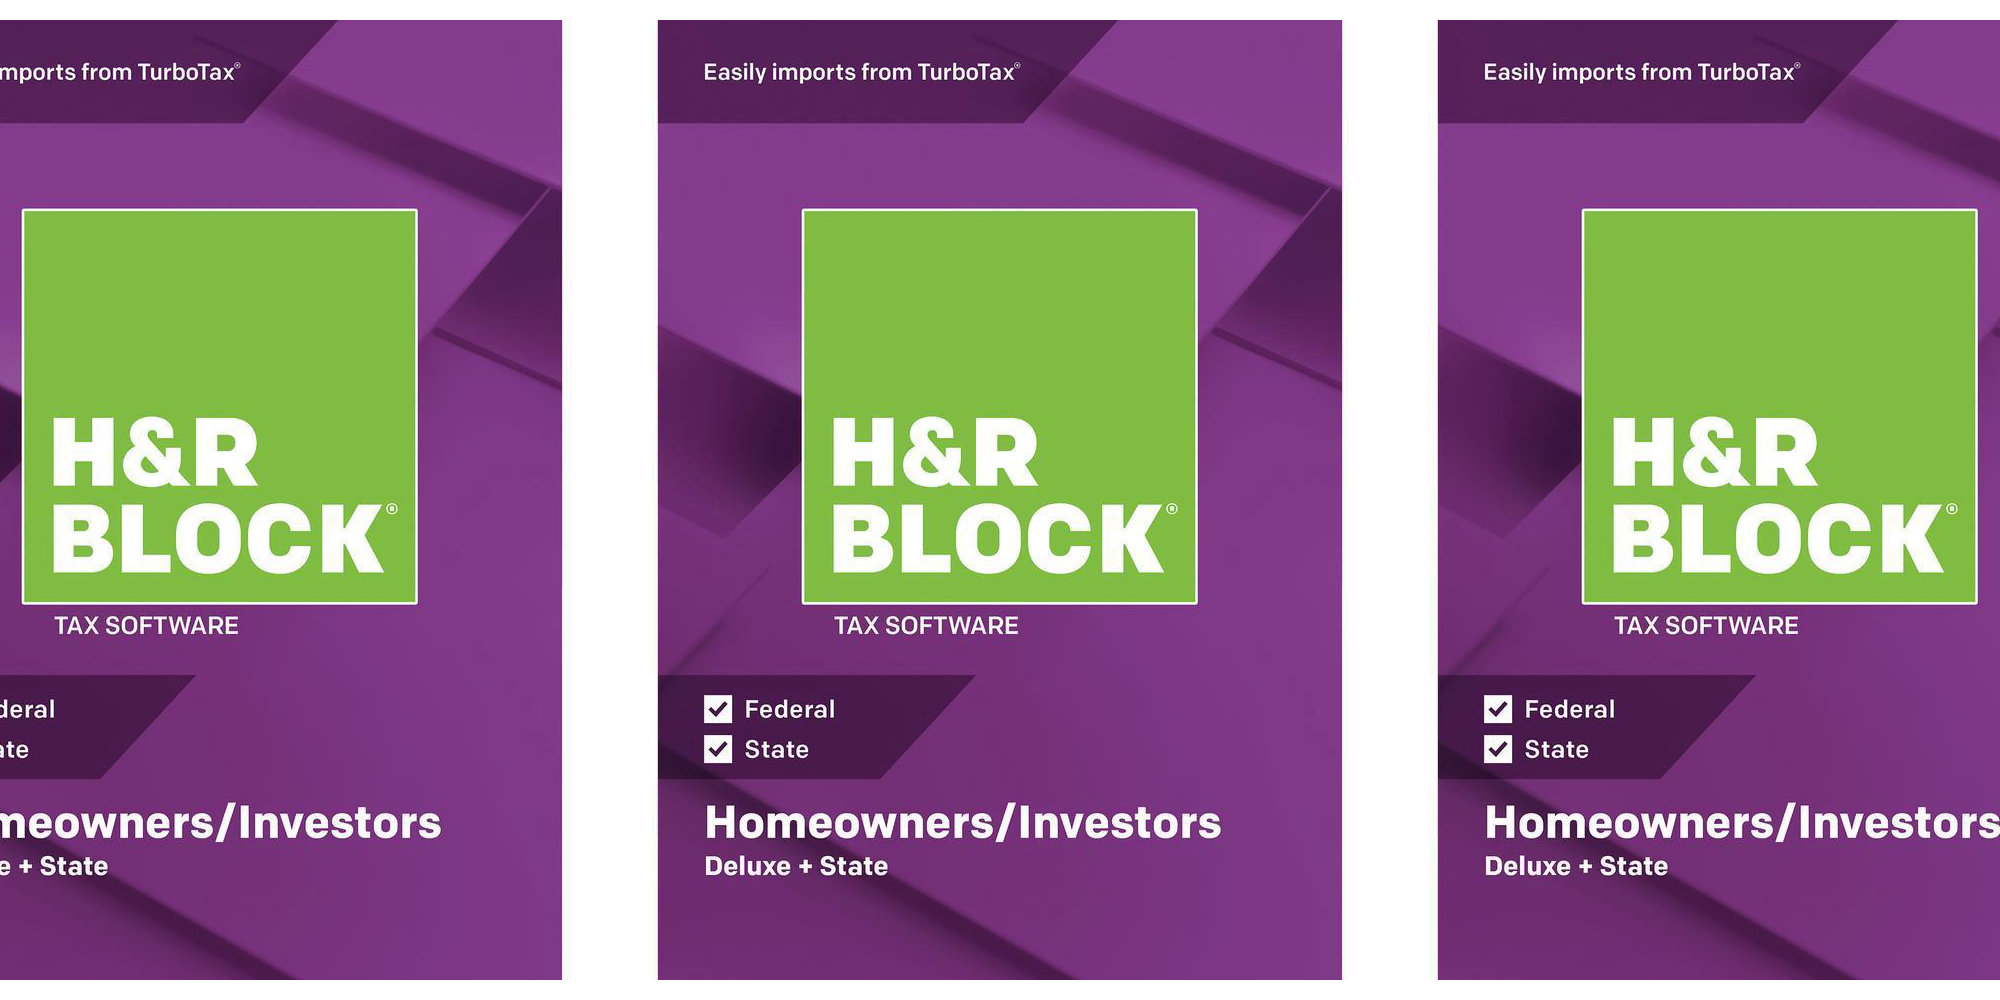 Maximize deductions with H&R BLOCK's Deluxe Tax Software for 20 (Reg